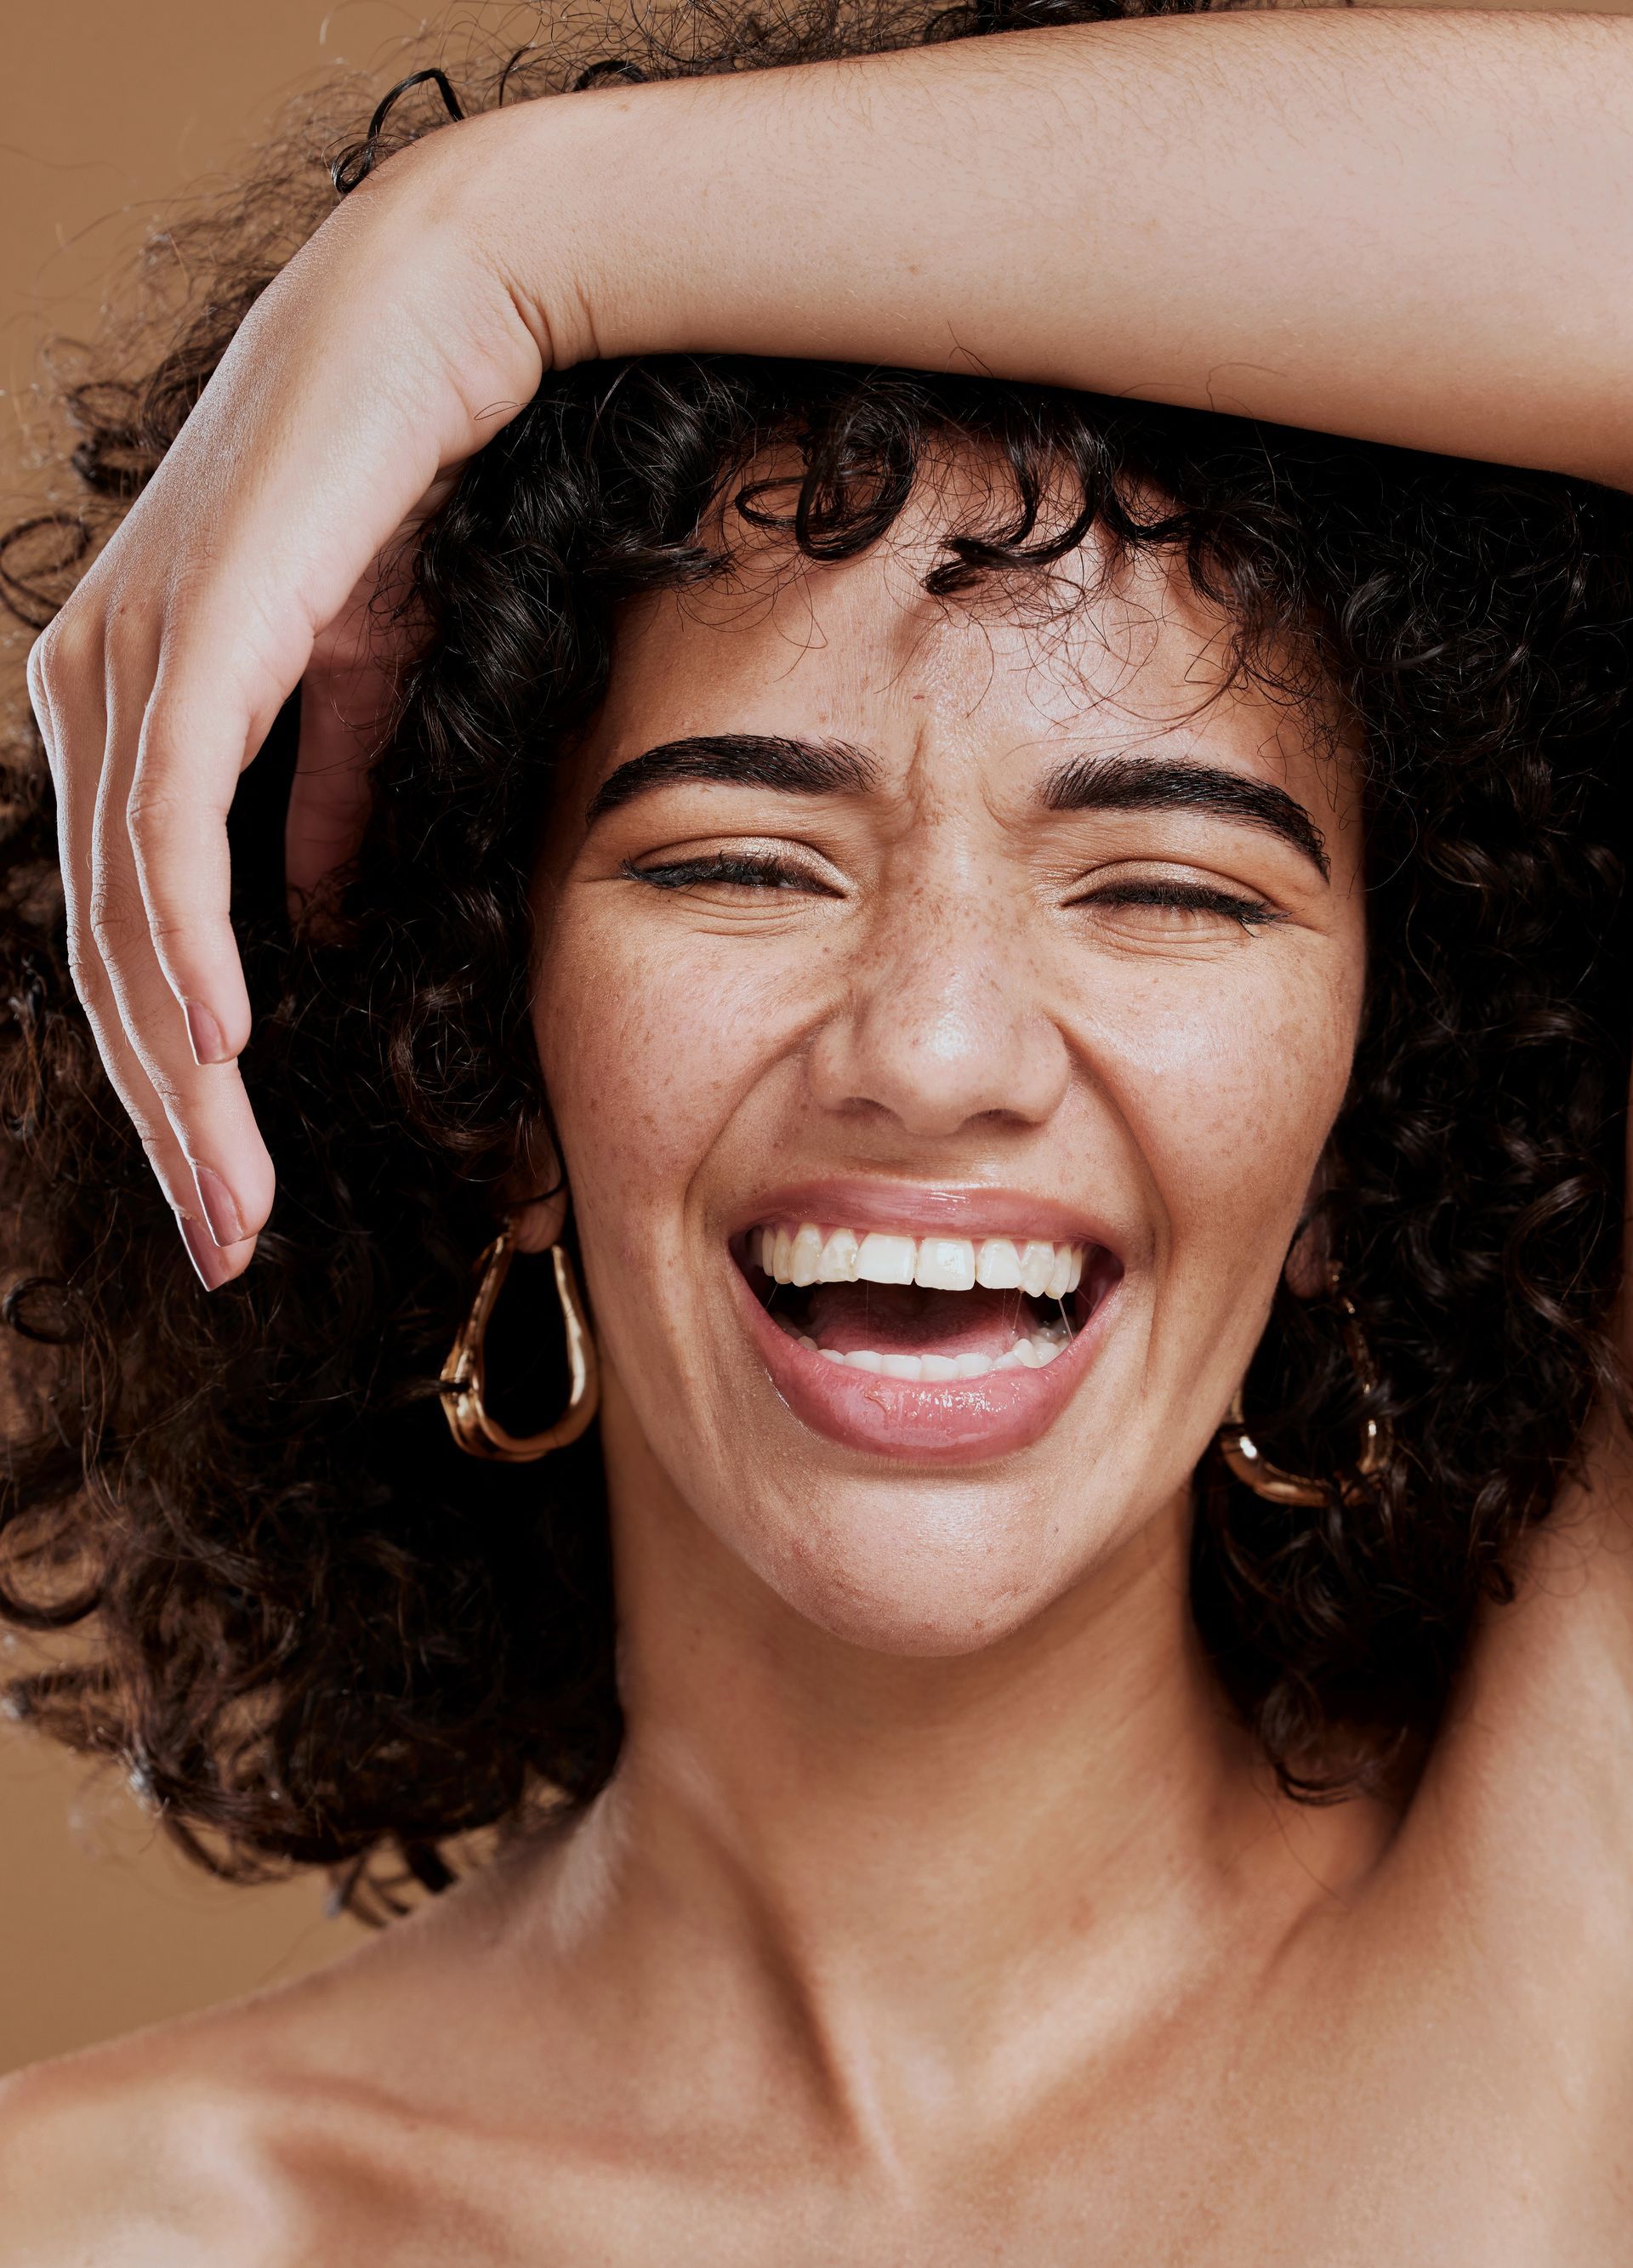 A woman with curly hair is laughing with her hand on her head.